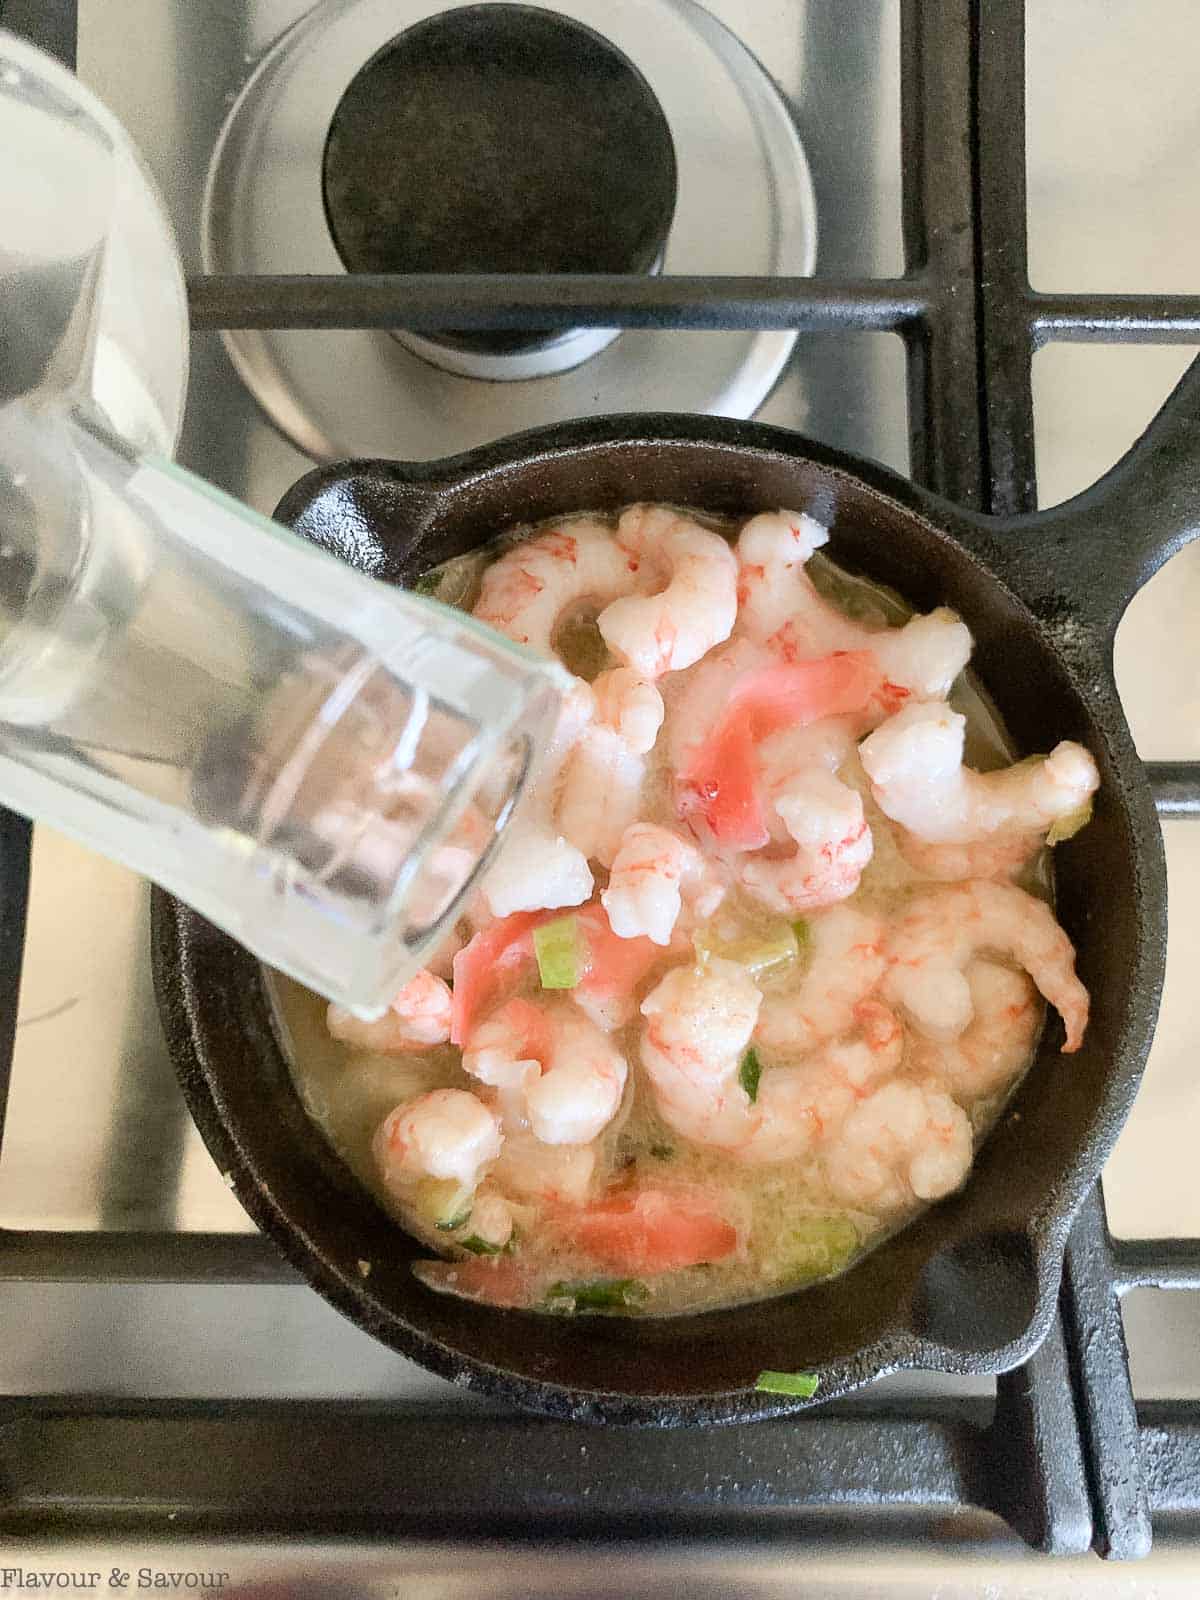 pour gin into skillet with shrimp